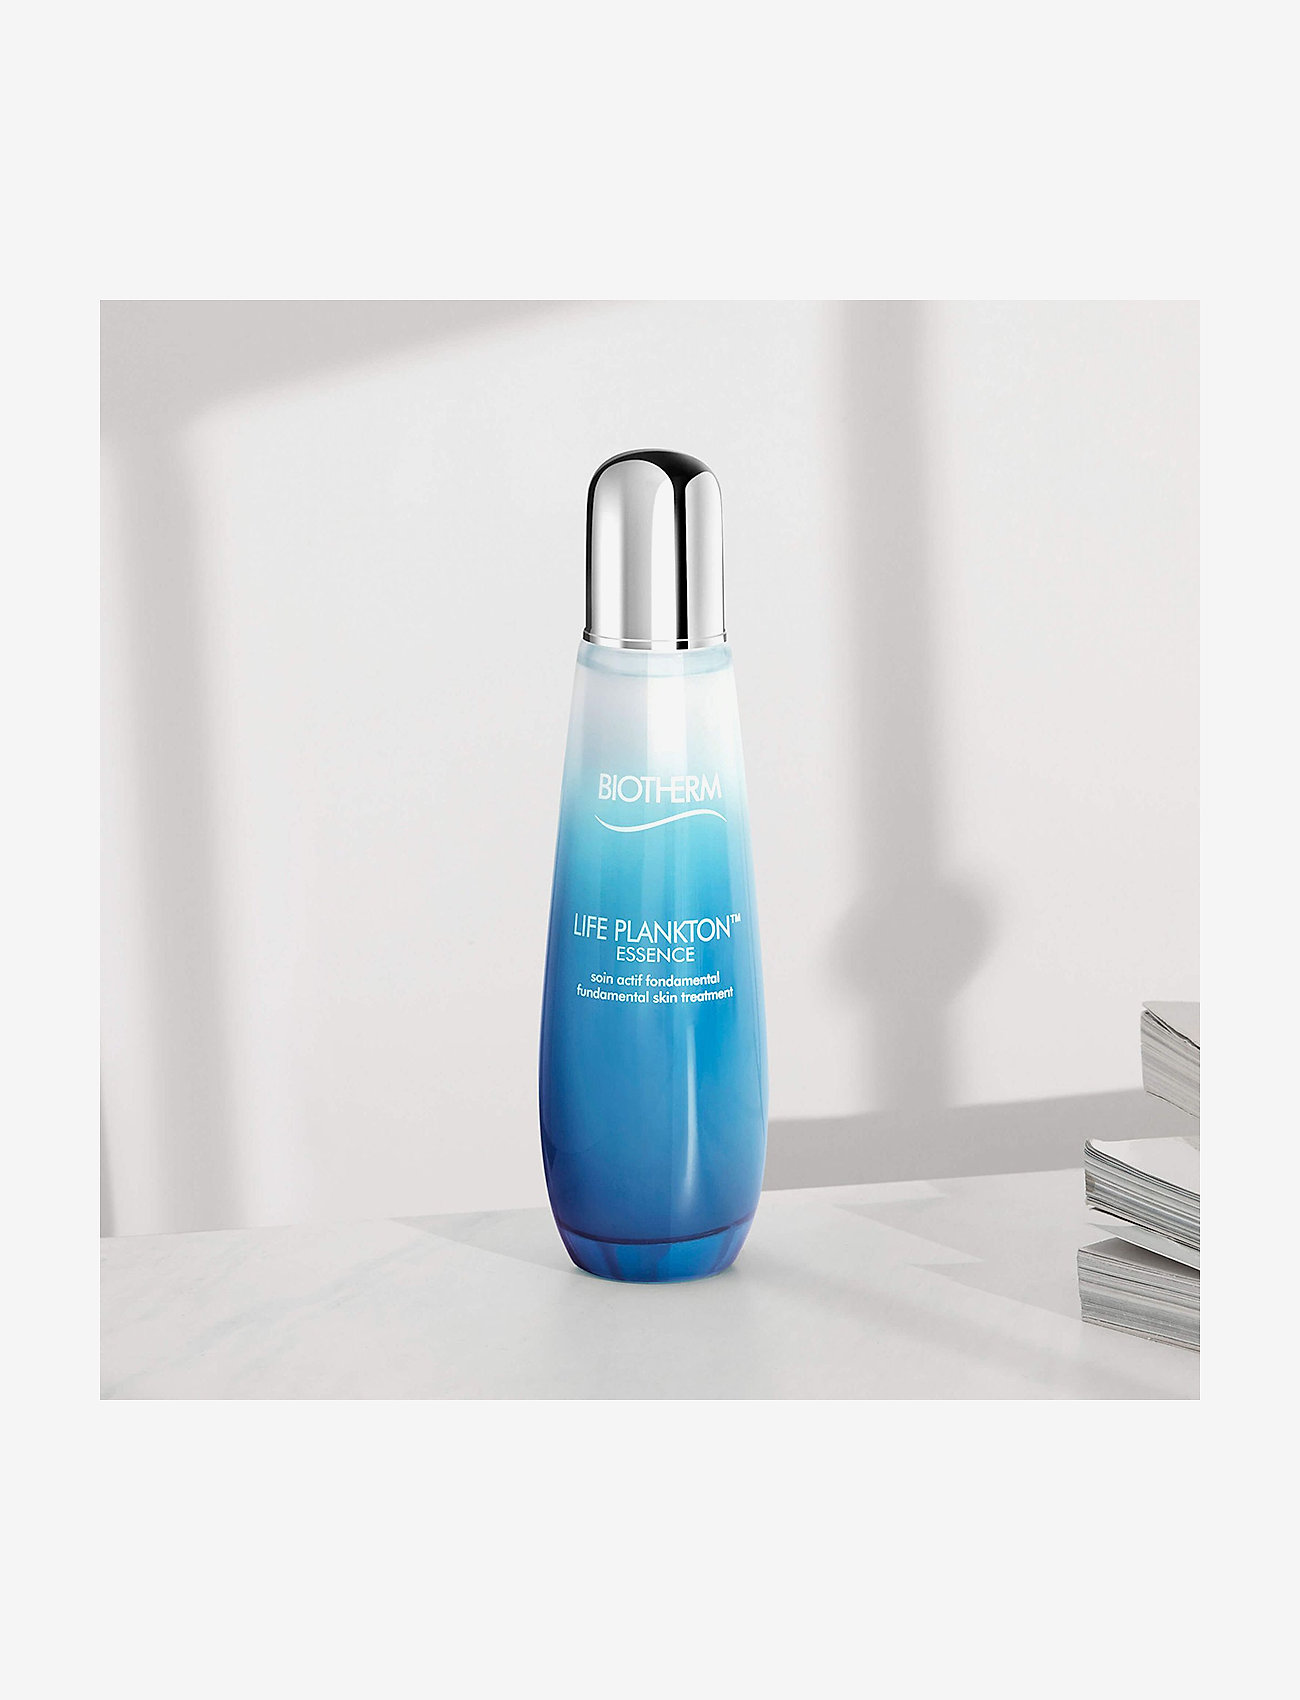 Biotherm - Life Plankton™ Essence Limited Edition - bodylotions - clear - 1